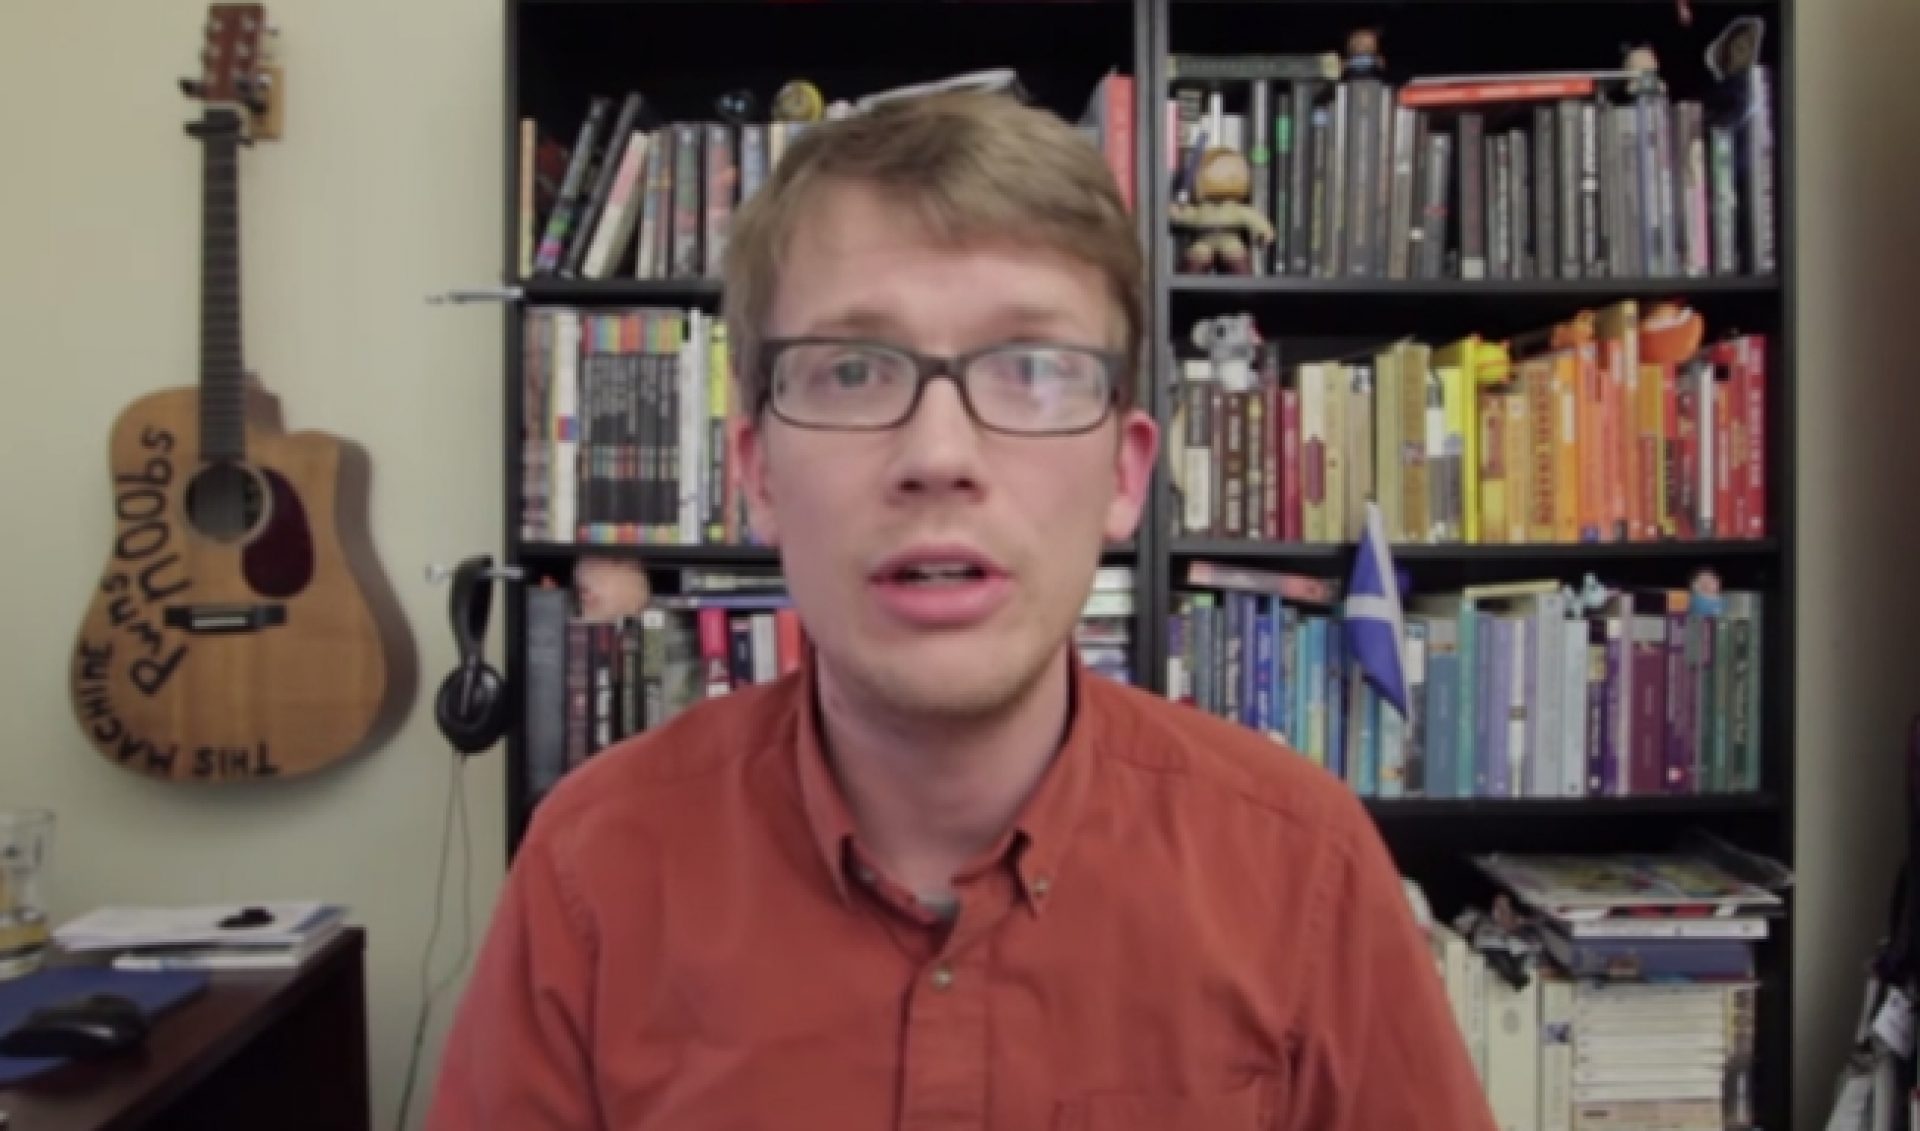 Vlogbrothers Set Up Task Force, Fund Series To Curb Sexual Abuse